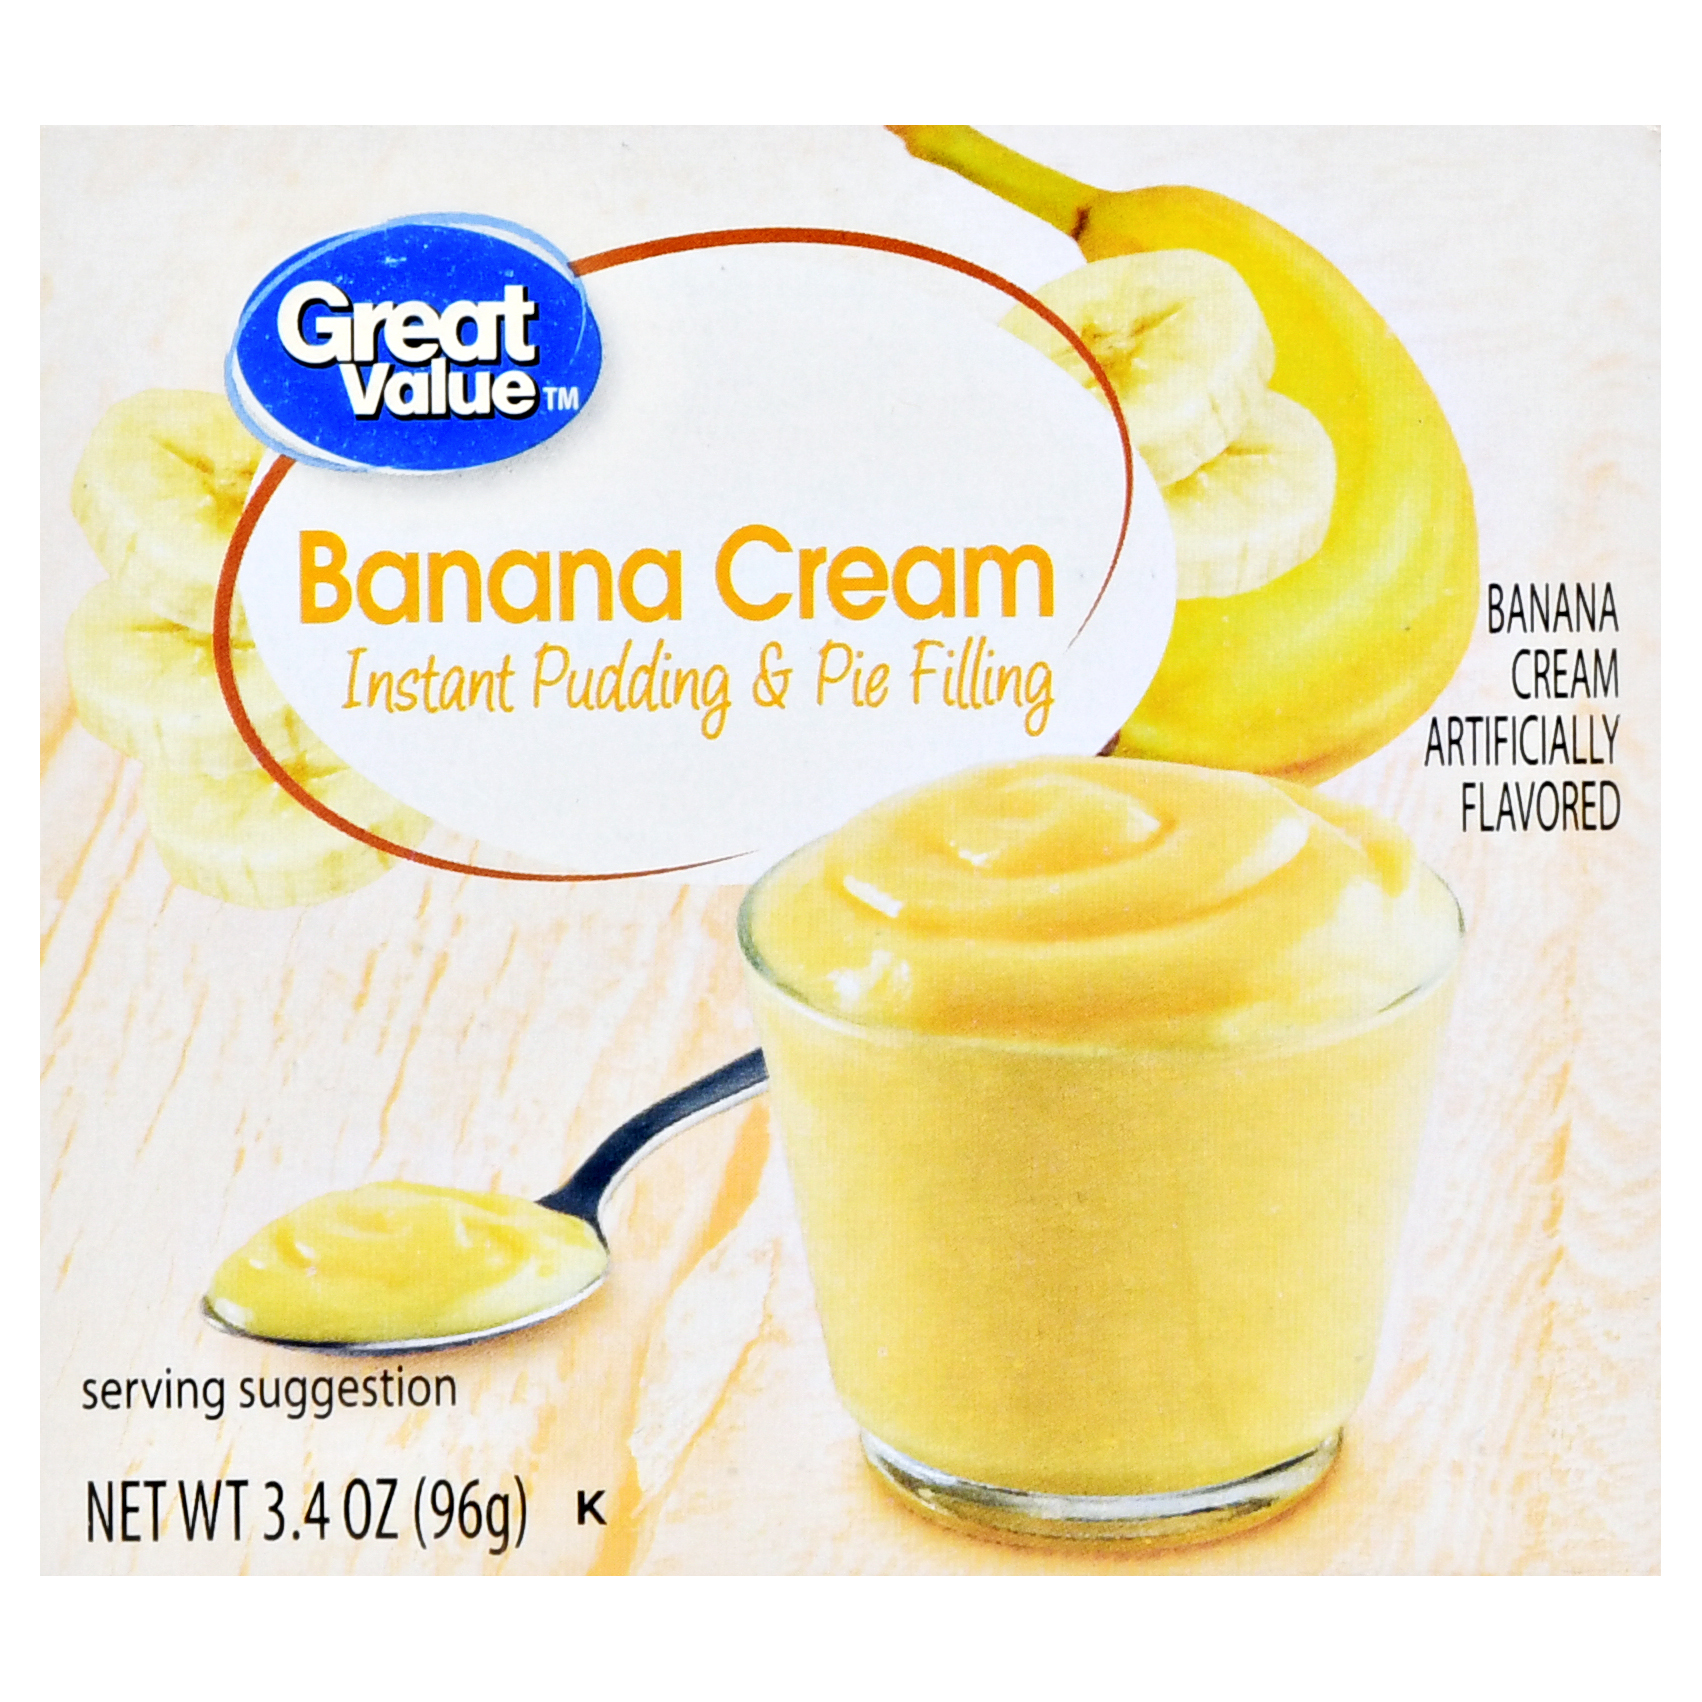 Great Value Banana Cream Instant Pudding & Pie Filling, 3.4 Oz Image